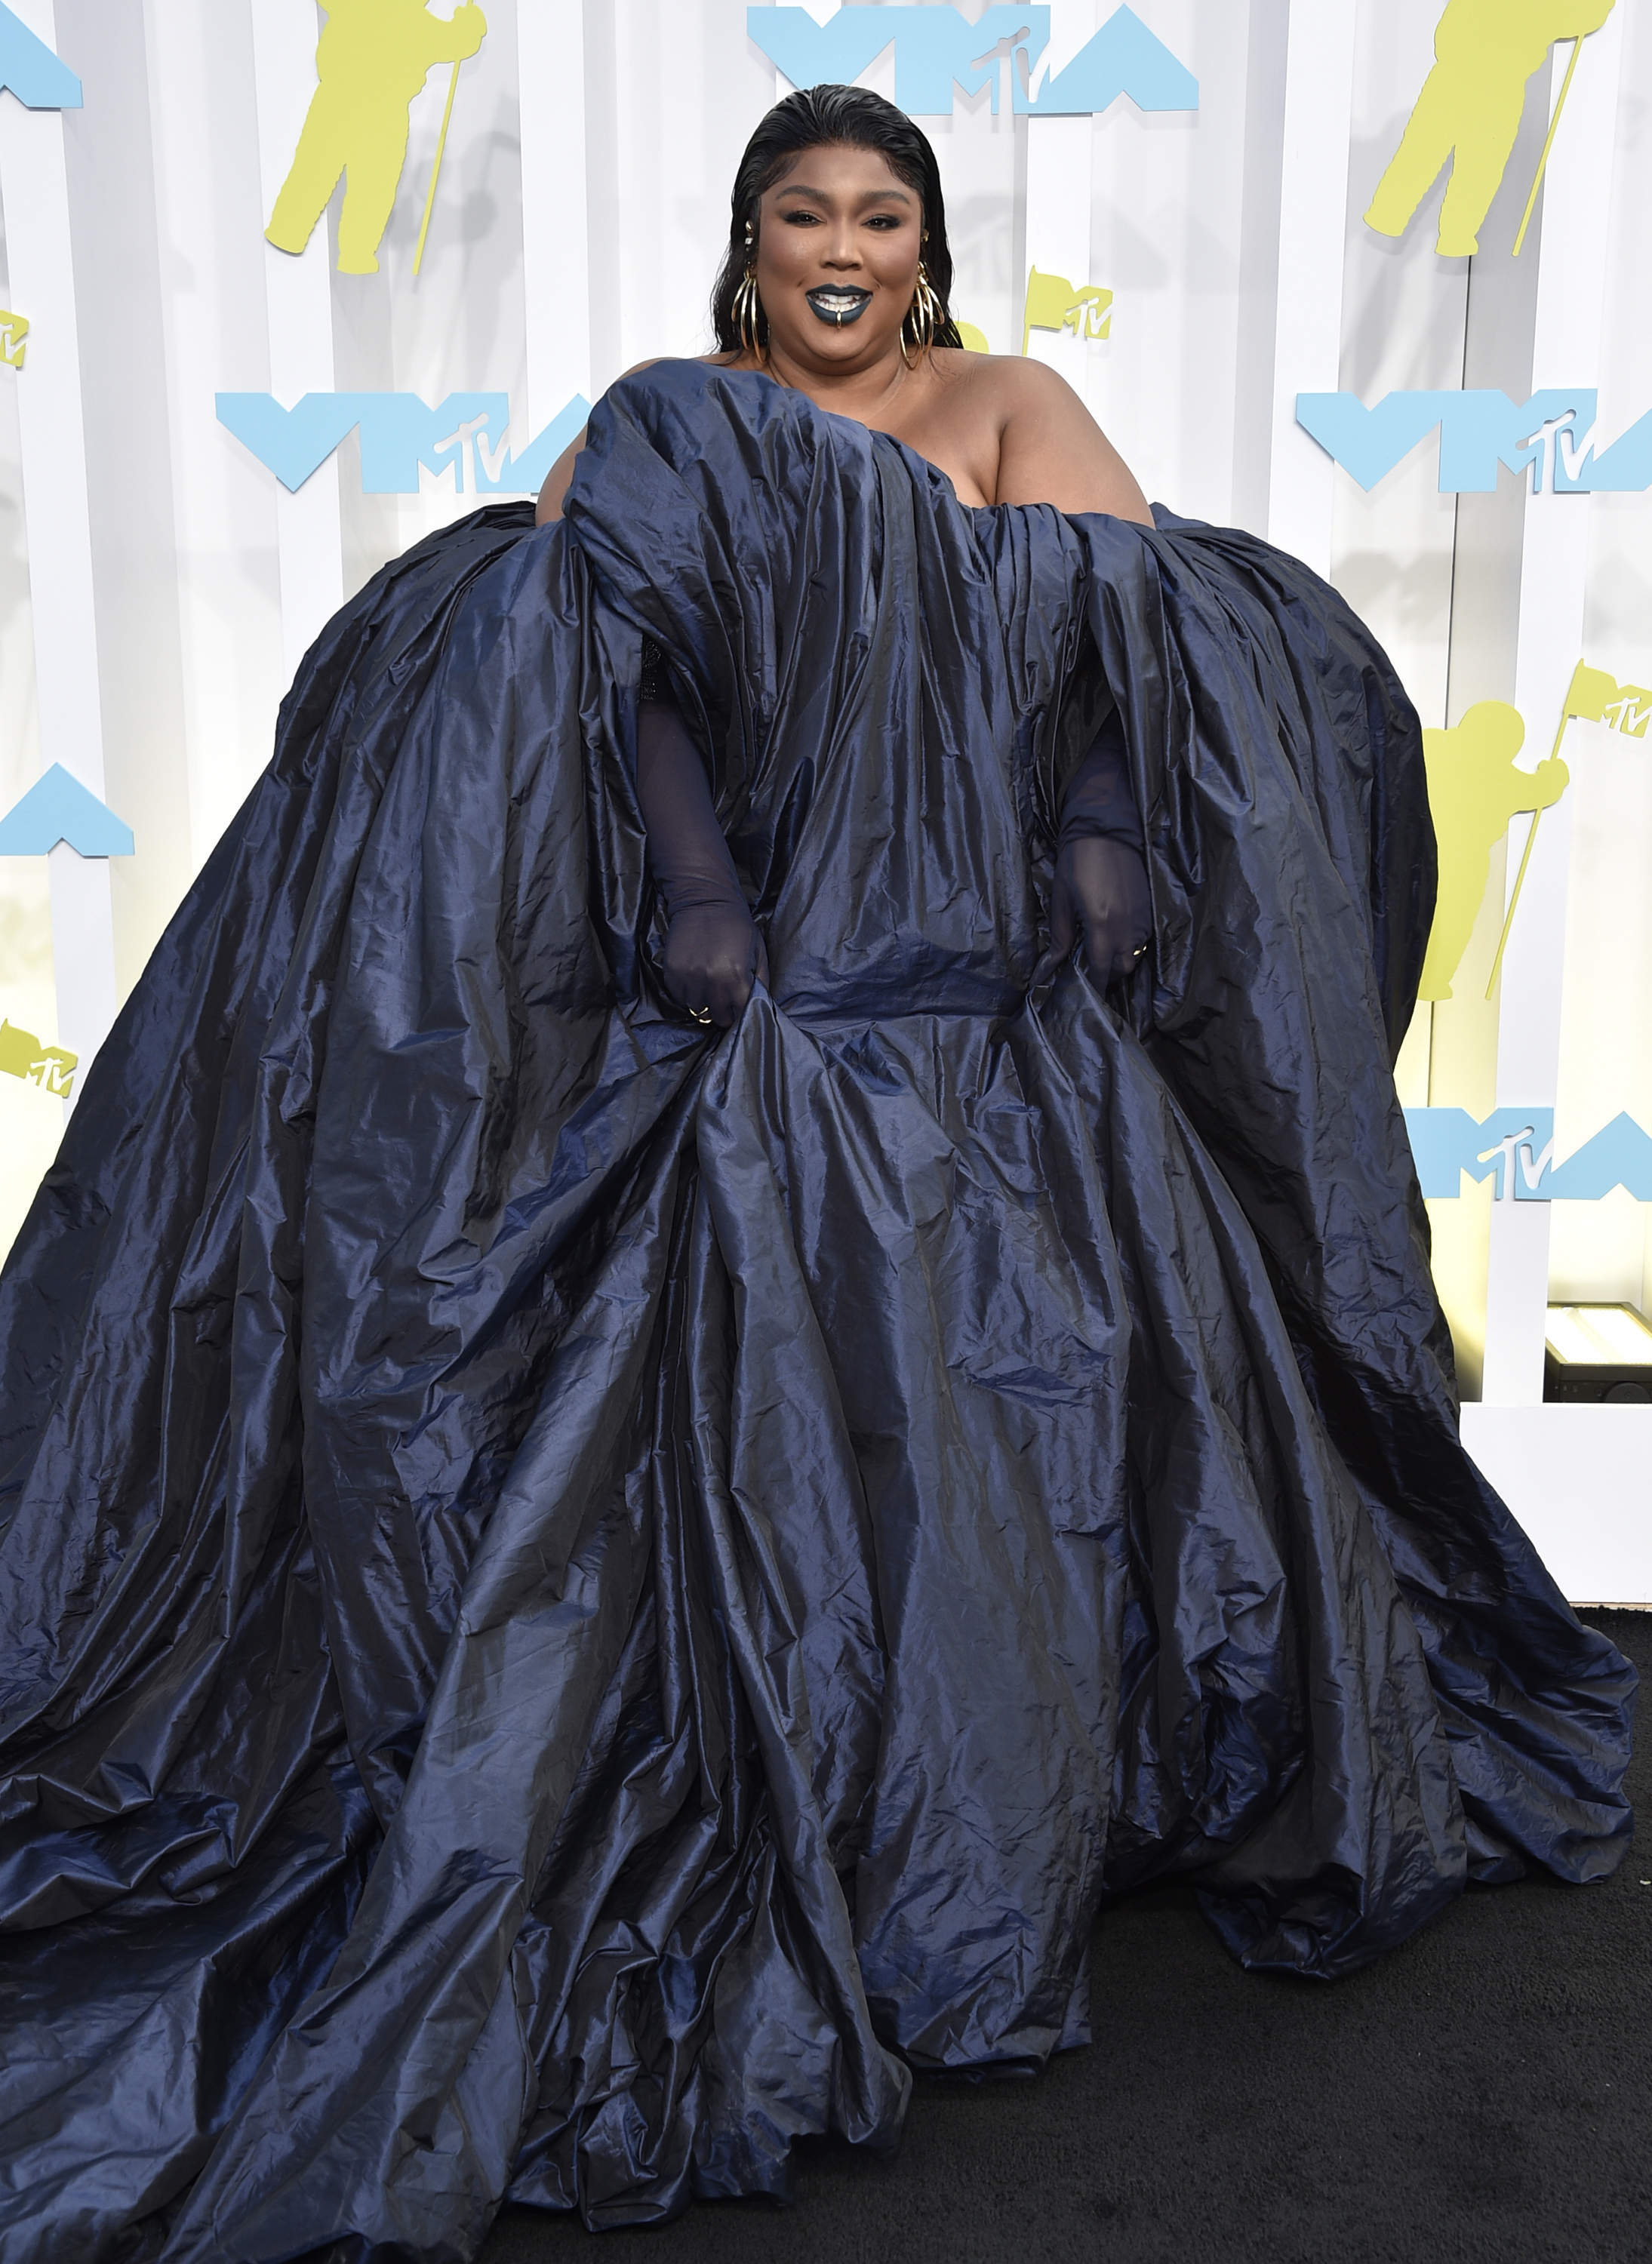 lizzo smiles on mtv vmas red carpet wearing a full-length layered navy blue gown, long gloves and gold jewellery